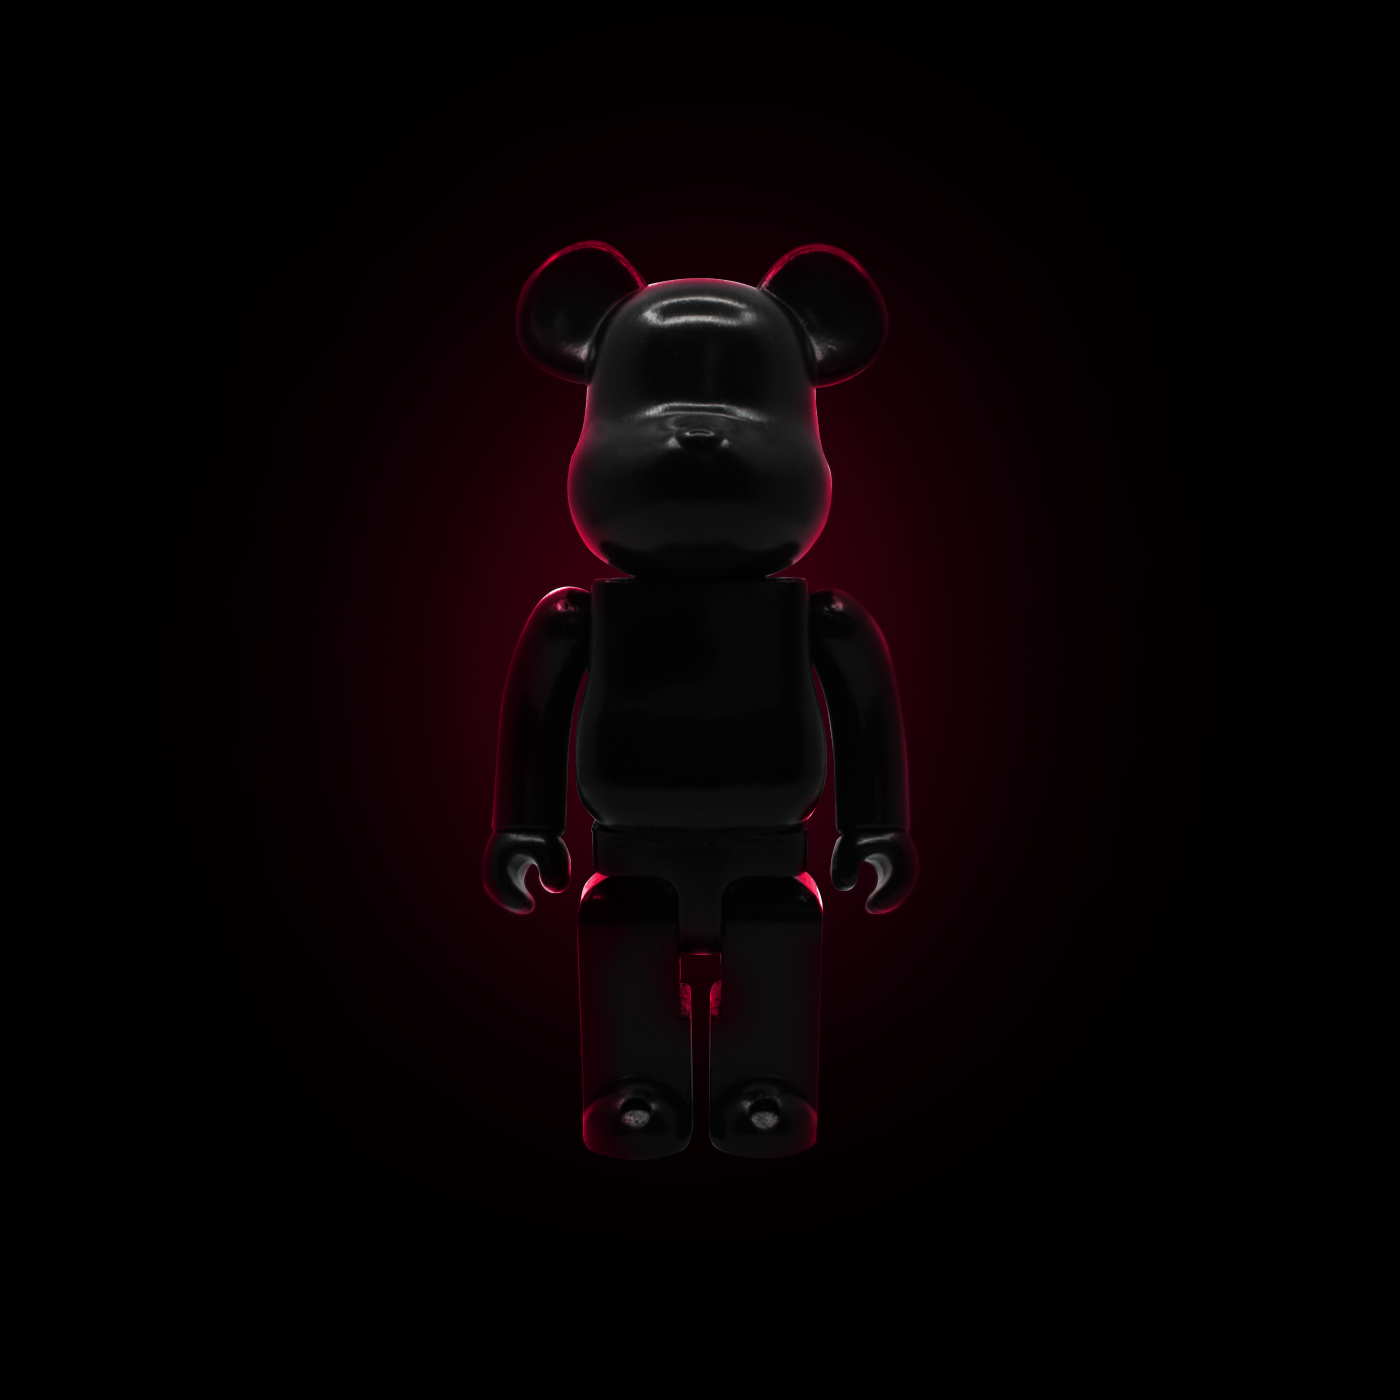 Premium Photo  The toy teddy bear dressed in leather belts and mask  accessory for bdsm games on a light background texture of a brick wall